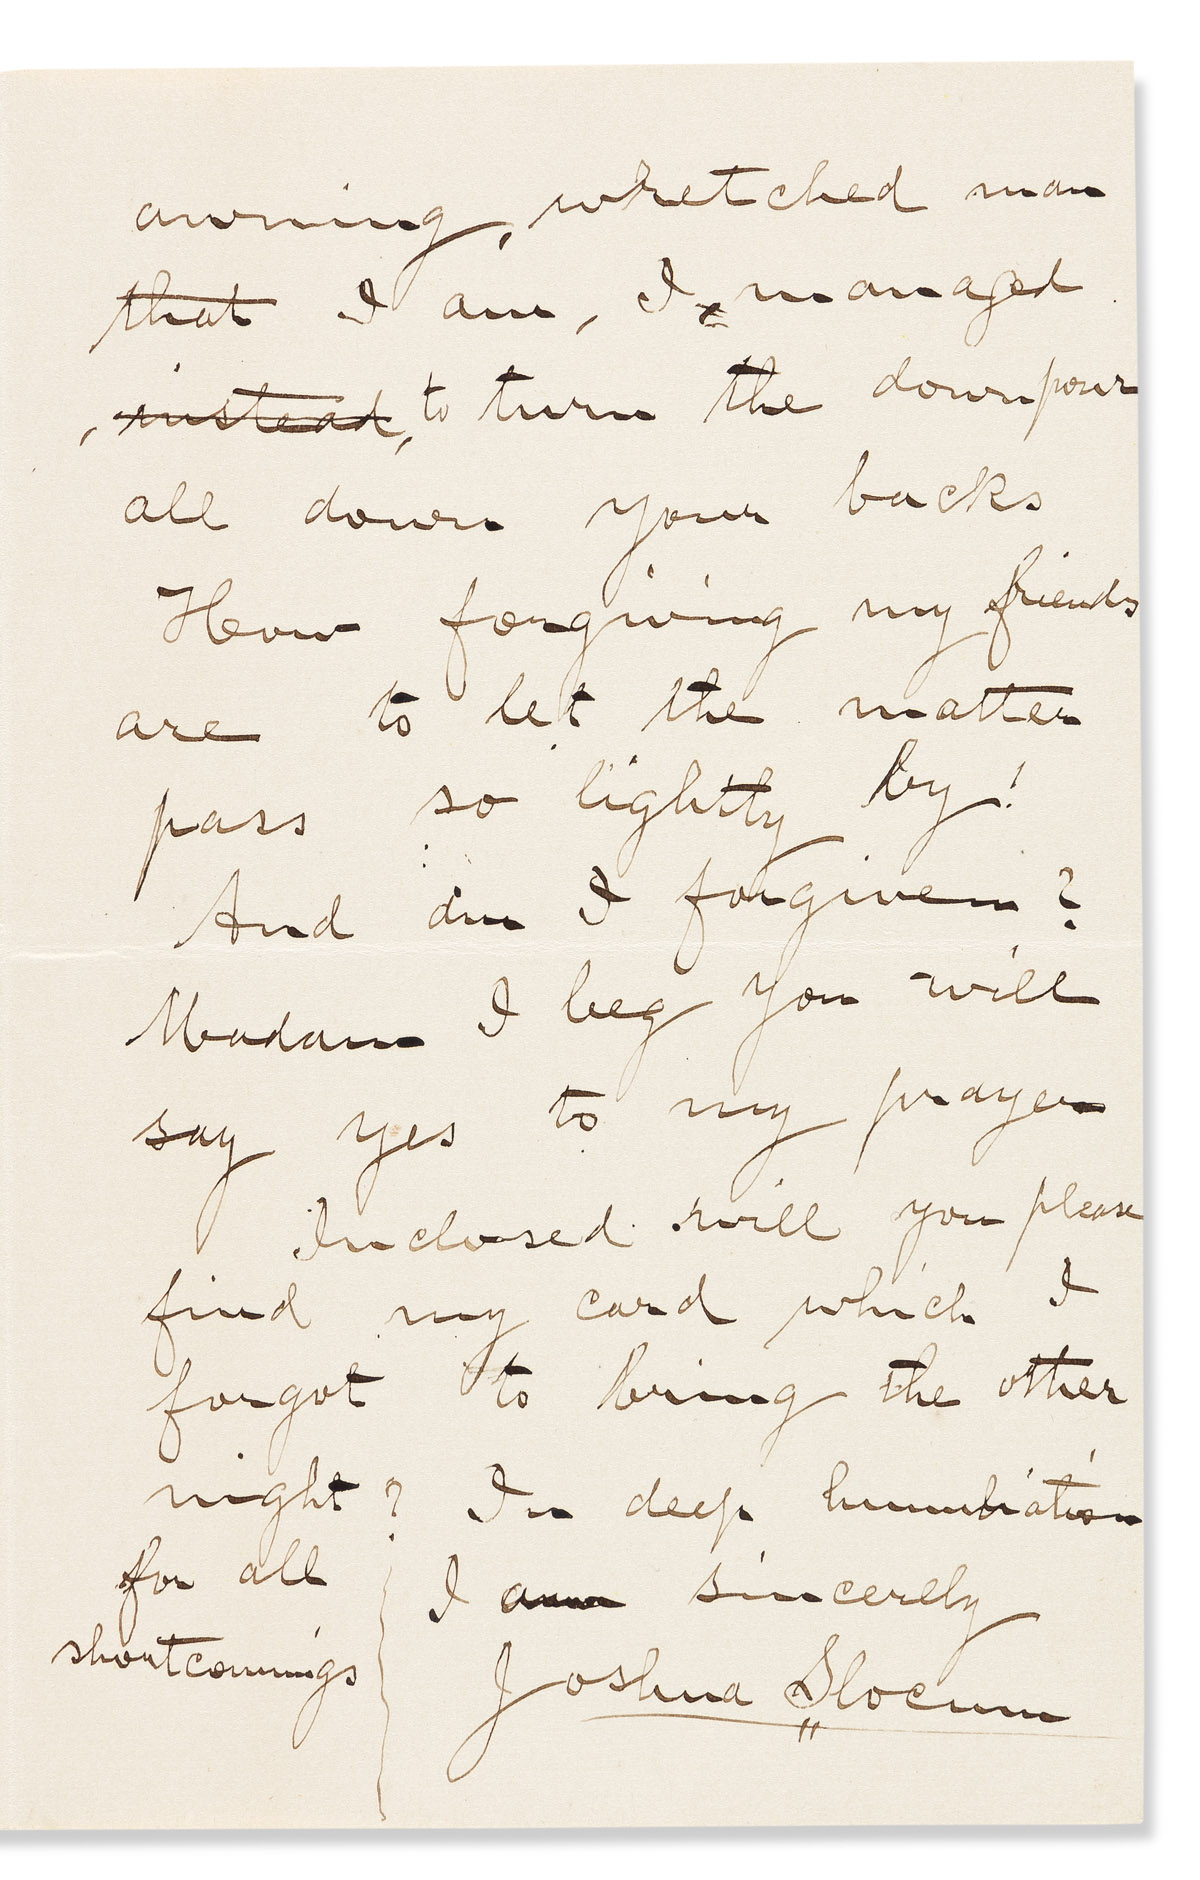 SLOCUM, JOSHUA. Two Autograph Letters Signed, to Dear Mrs. Anthony.